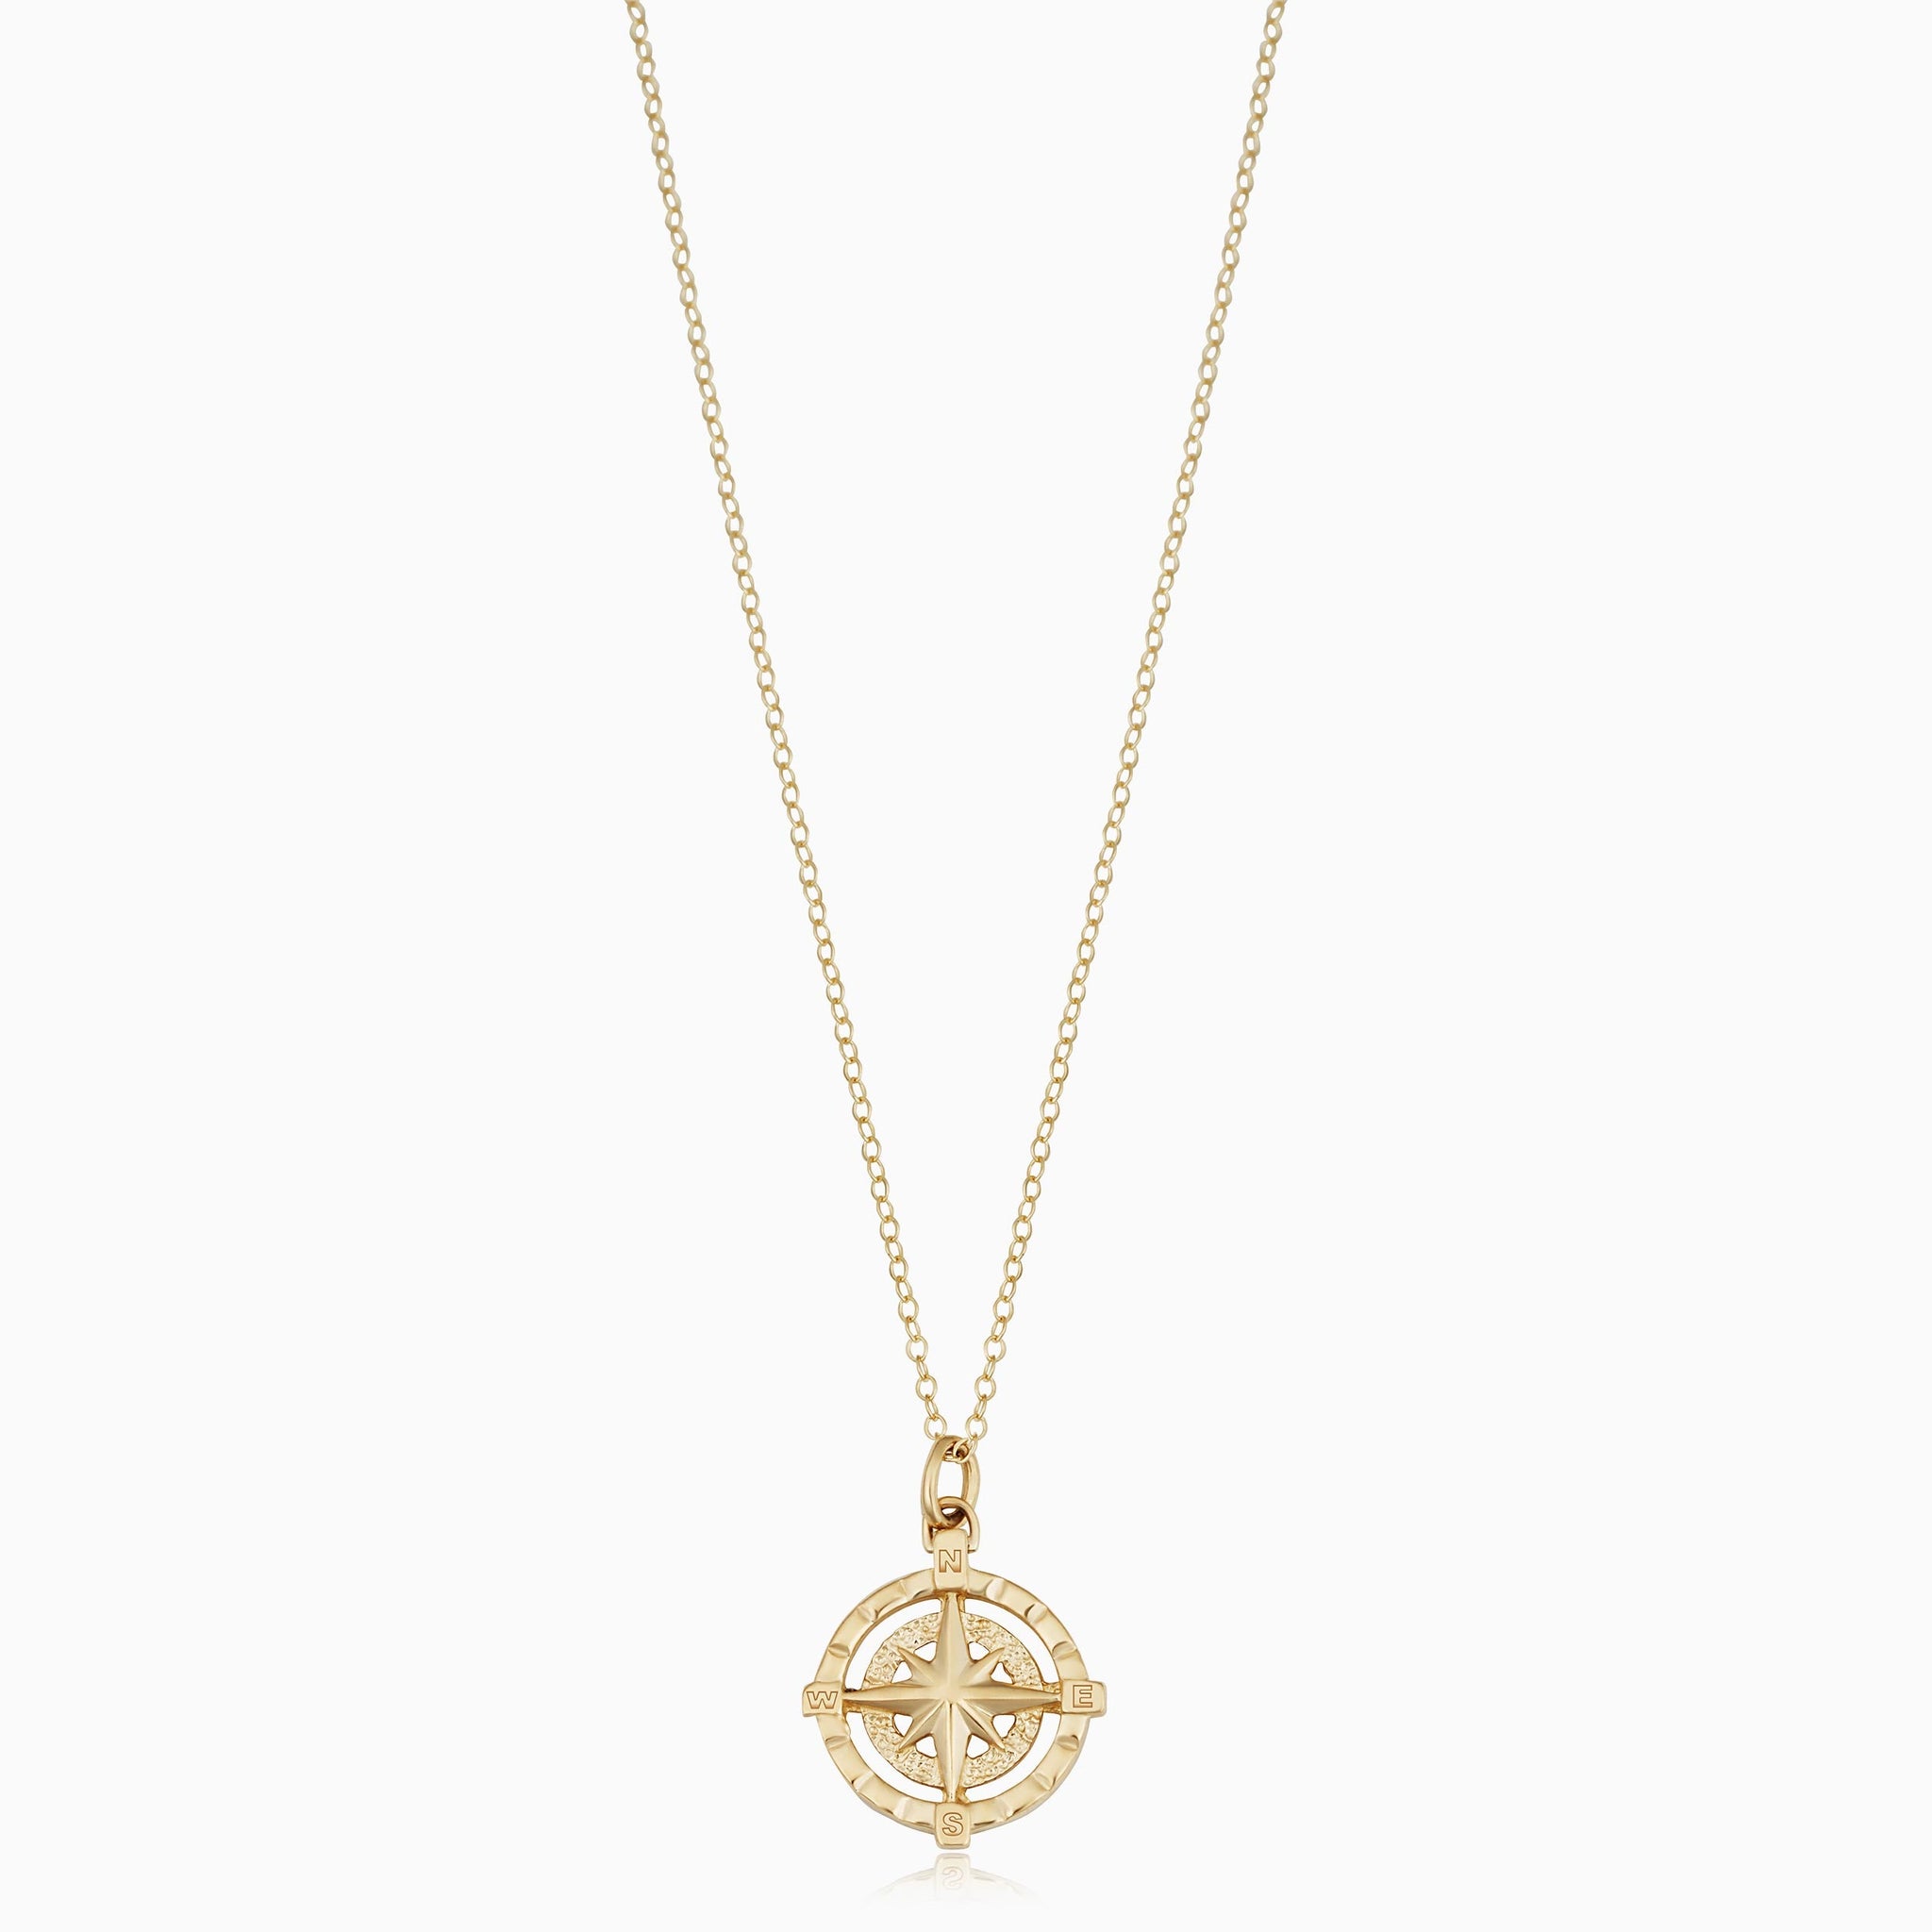 14K Gold Stay the Course Compass Pendant - JH Breakell and Co.